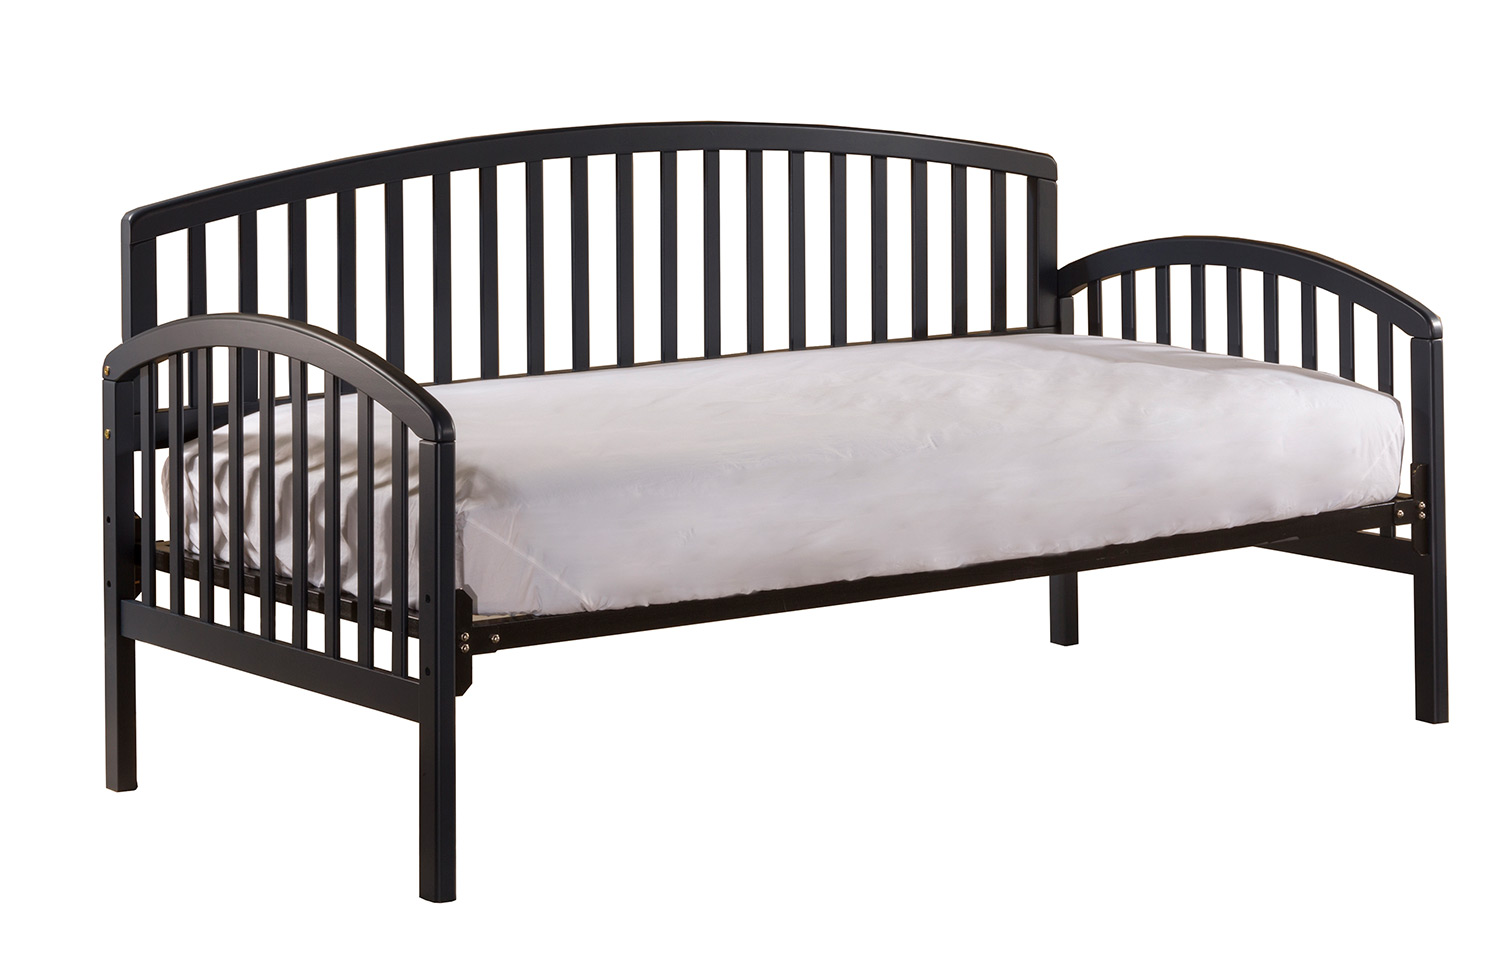 Hillsdale Carolina Daybed with Suspension Deck - Navy